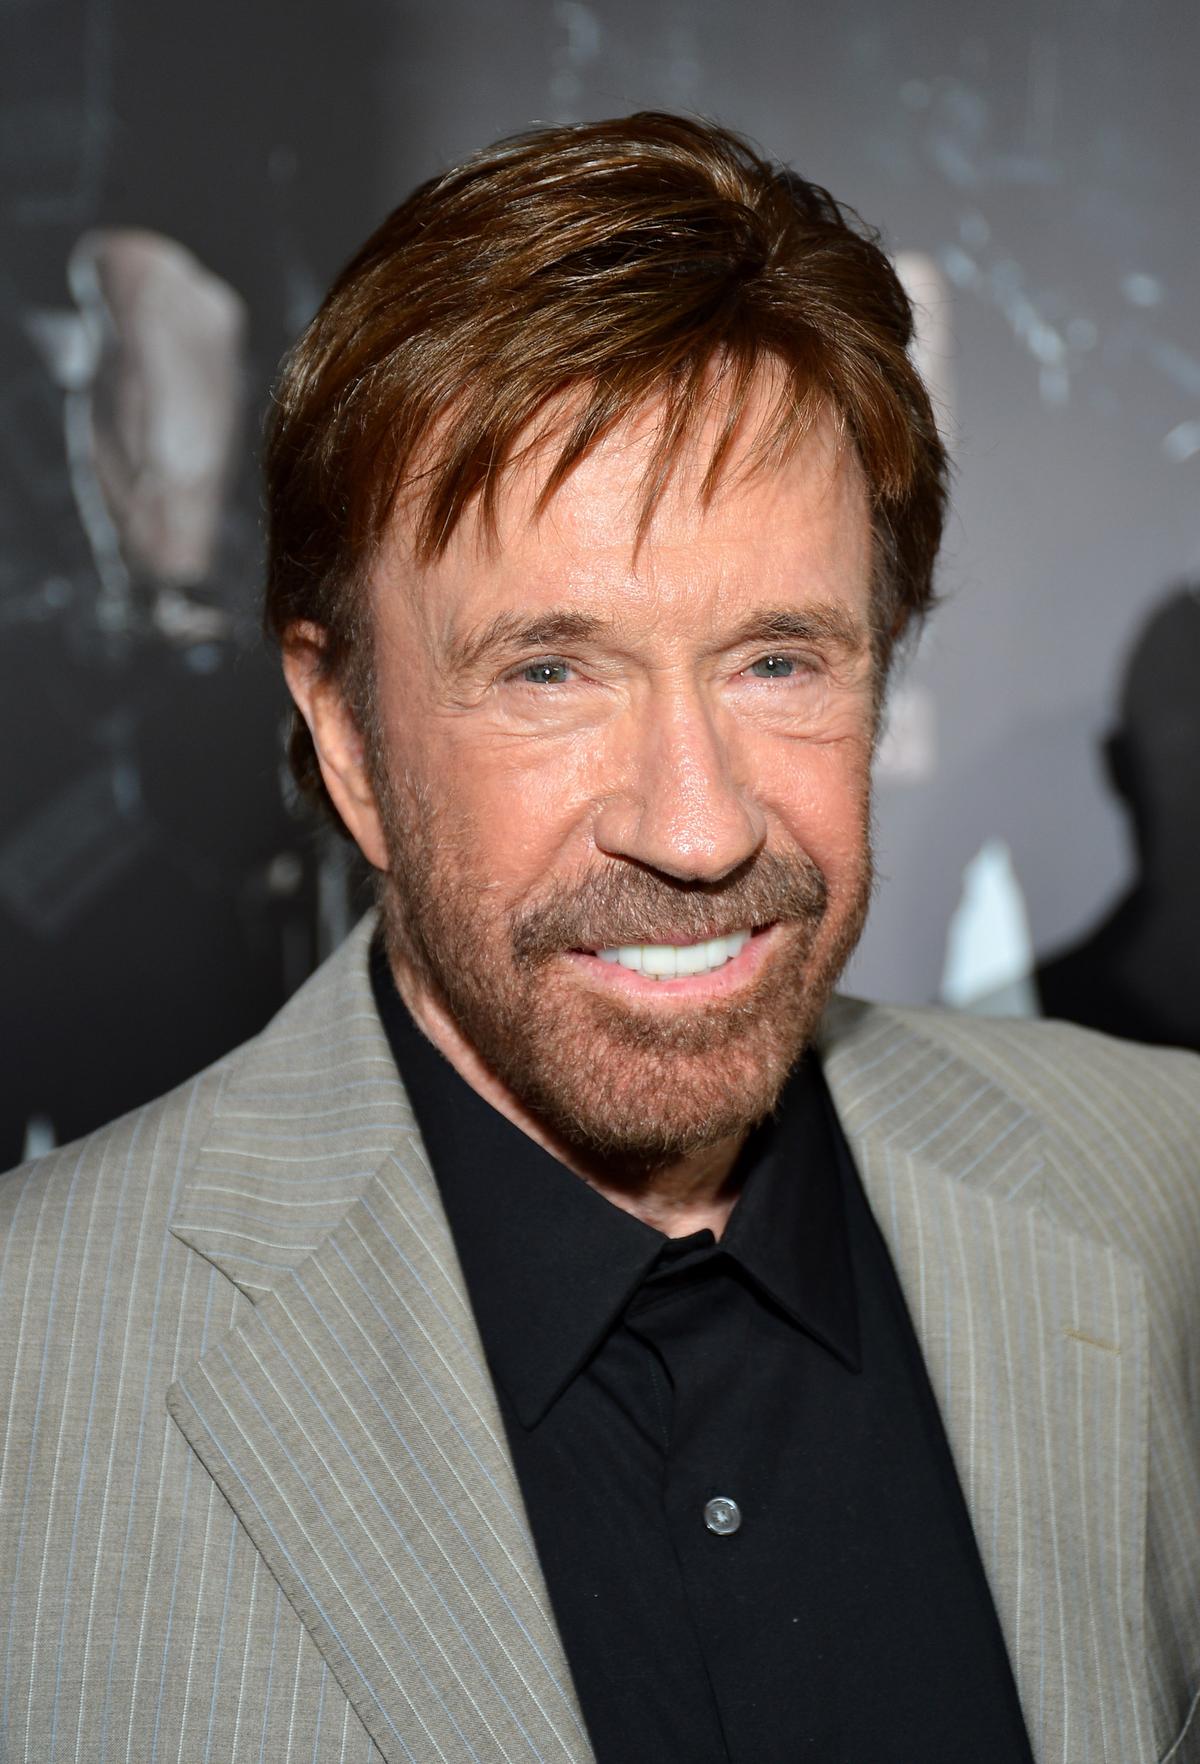 ©Getty Images | <a href="https://www.gettyimages.com/detail/news-photo/actor-chuck-norris-arrives-at-lionsgate-films-the-news-photo/150327735?adppopup=true">Frazer Harrison</a>